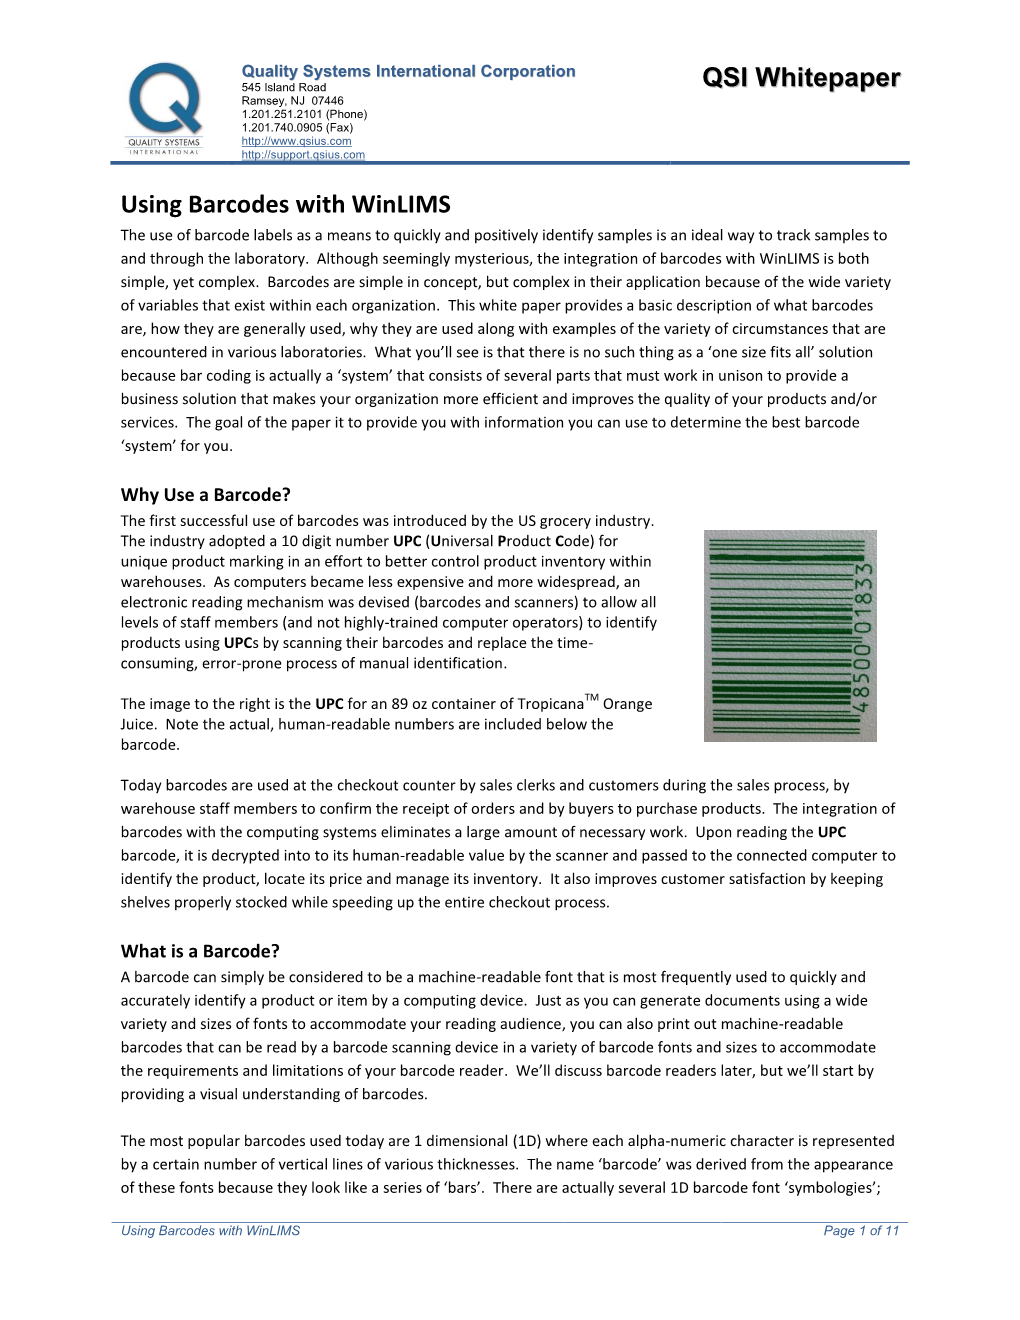 QSI Whitepaper Using Barcodes with Winlims